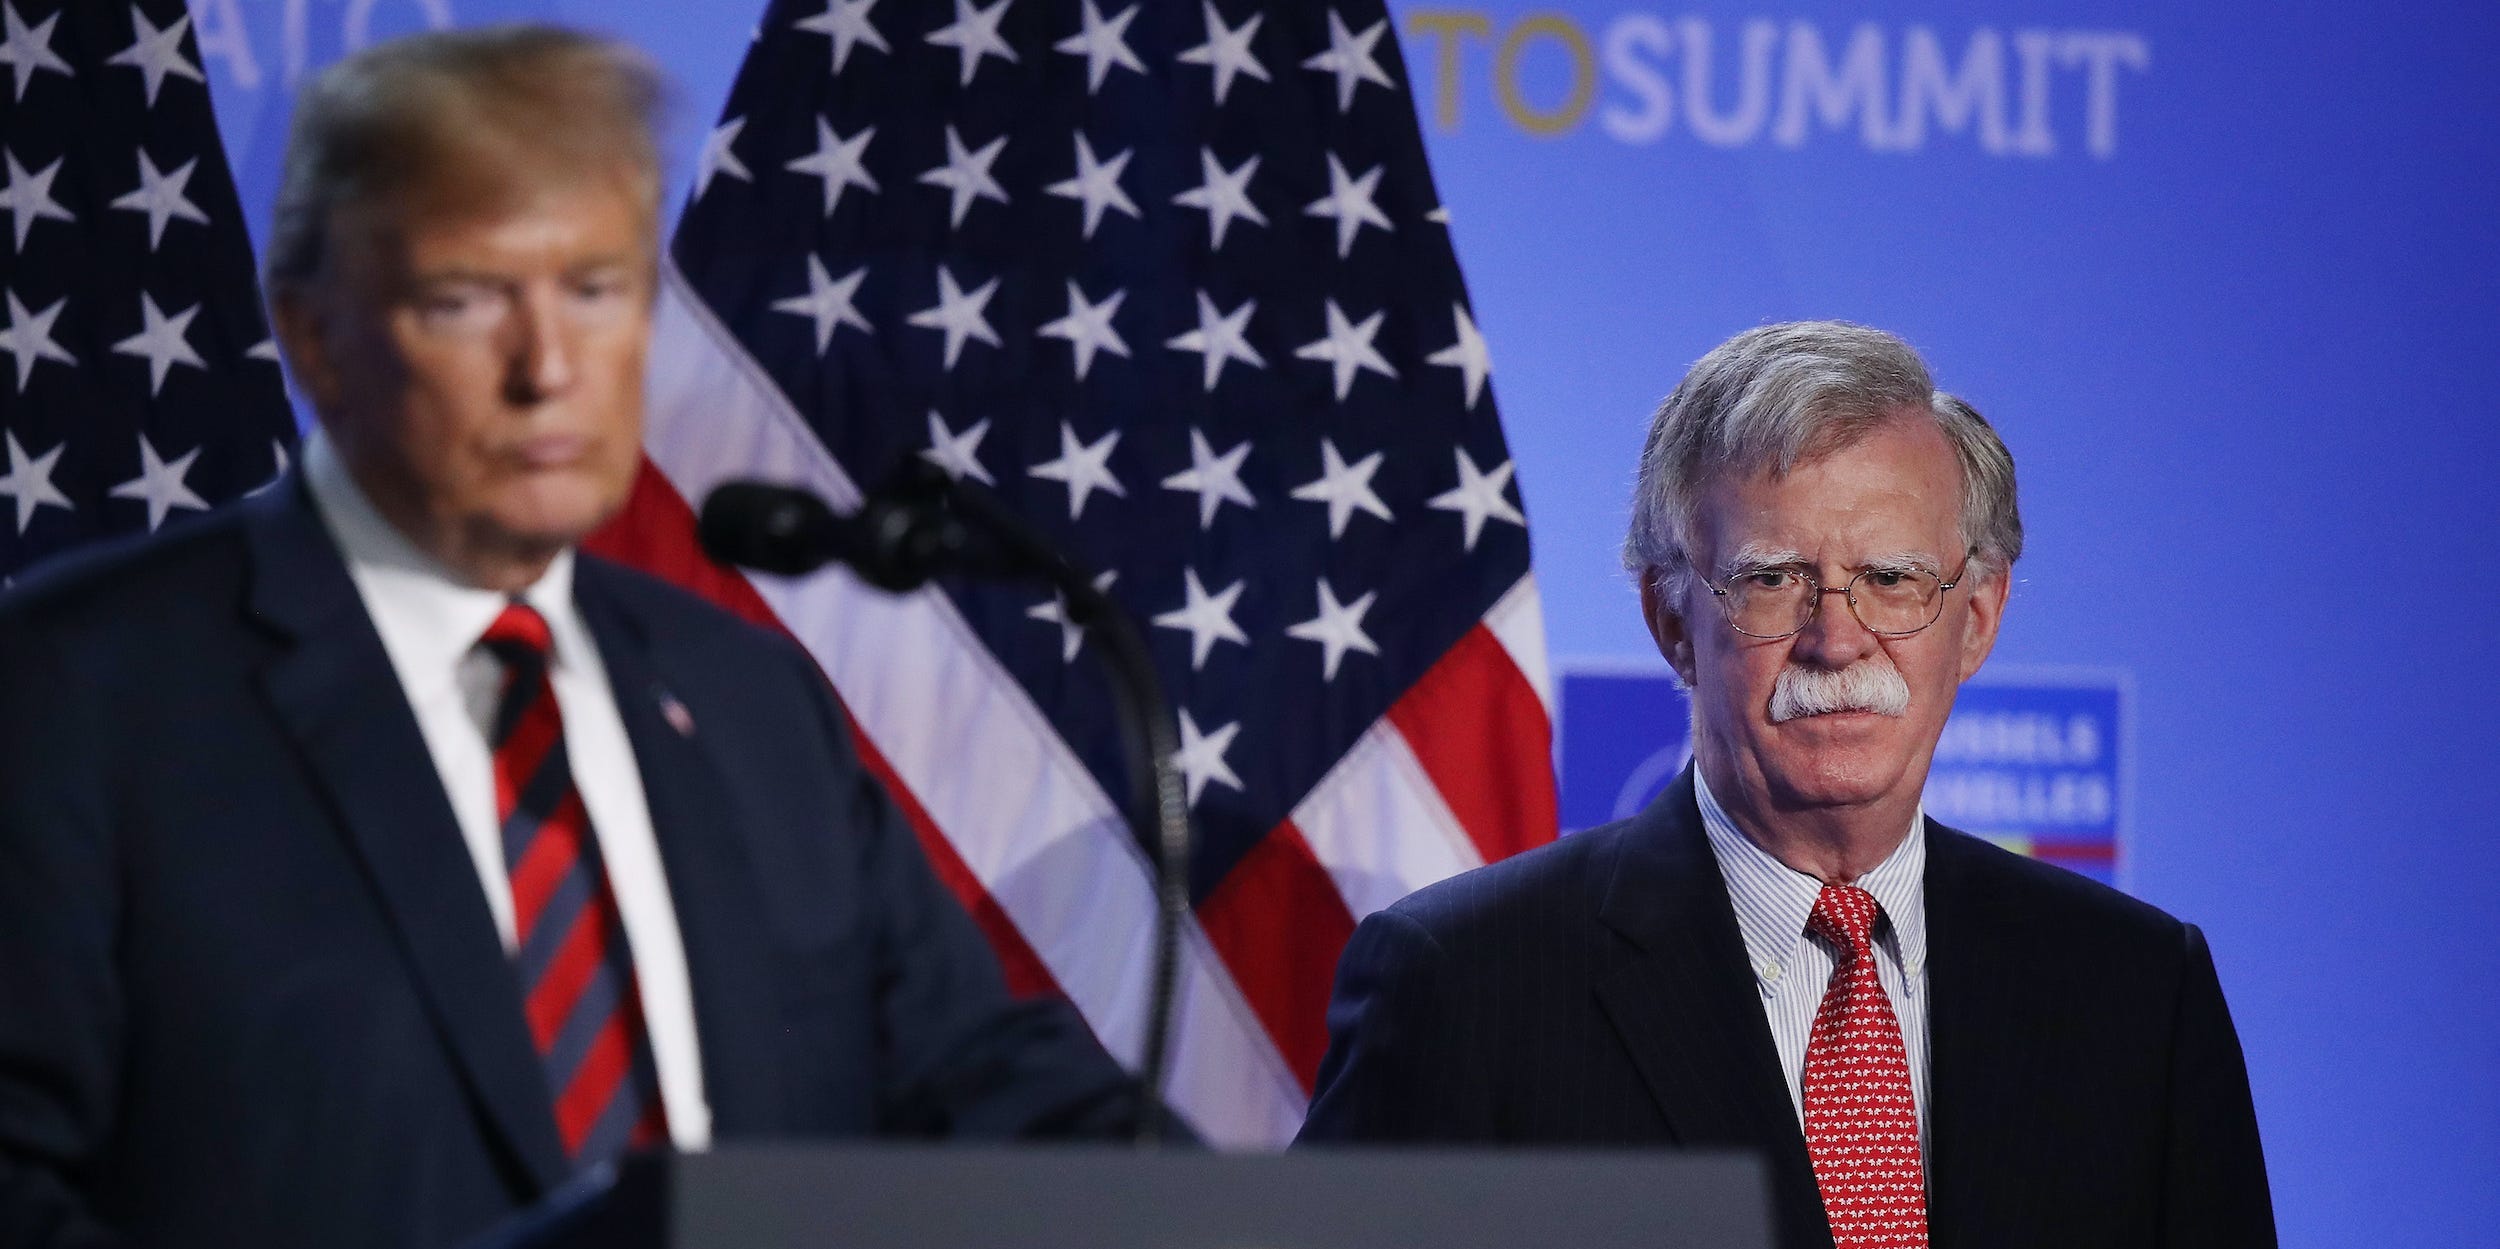 Donald Trump stands with his lips pursed as John Bolton looks directly into the camera from behind him.